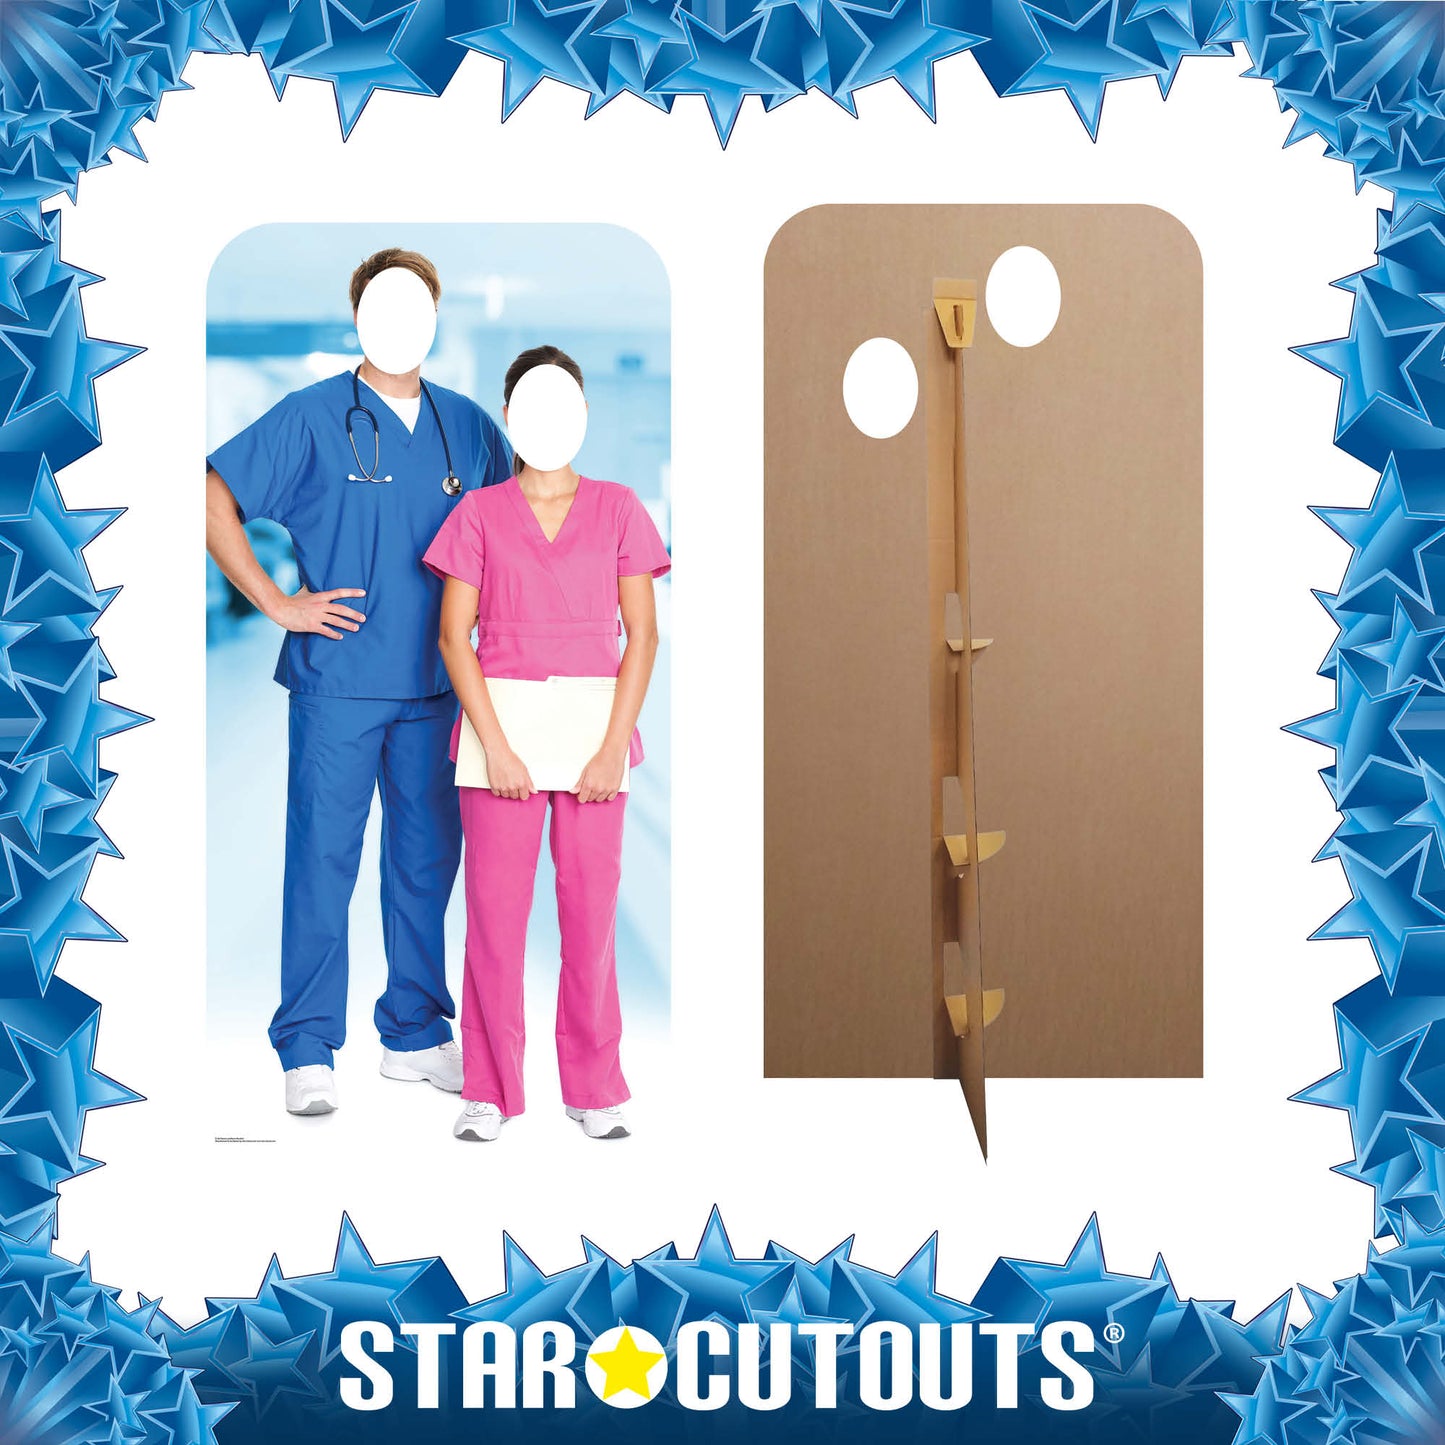 SC1567 Doctor & Nurse Stand-In  Cardboard Cut Out Height 190cm